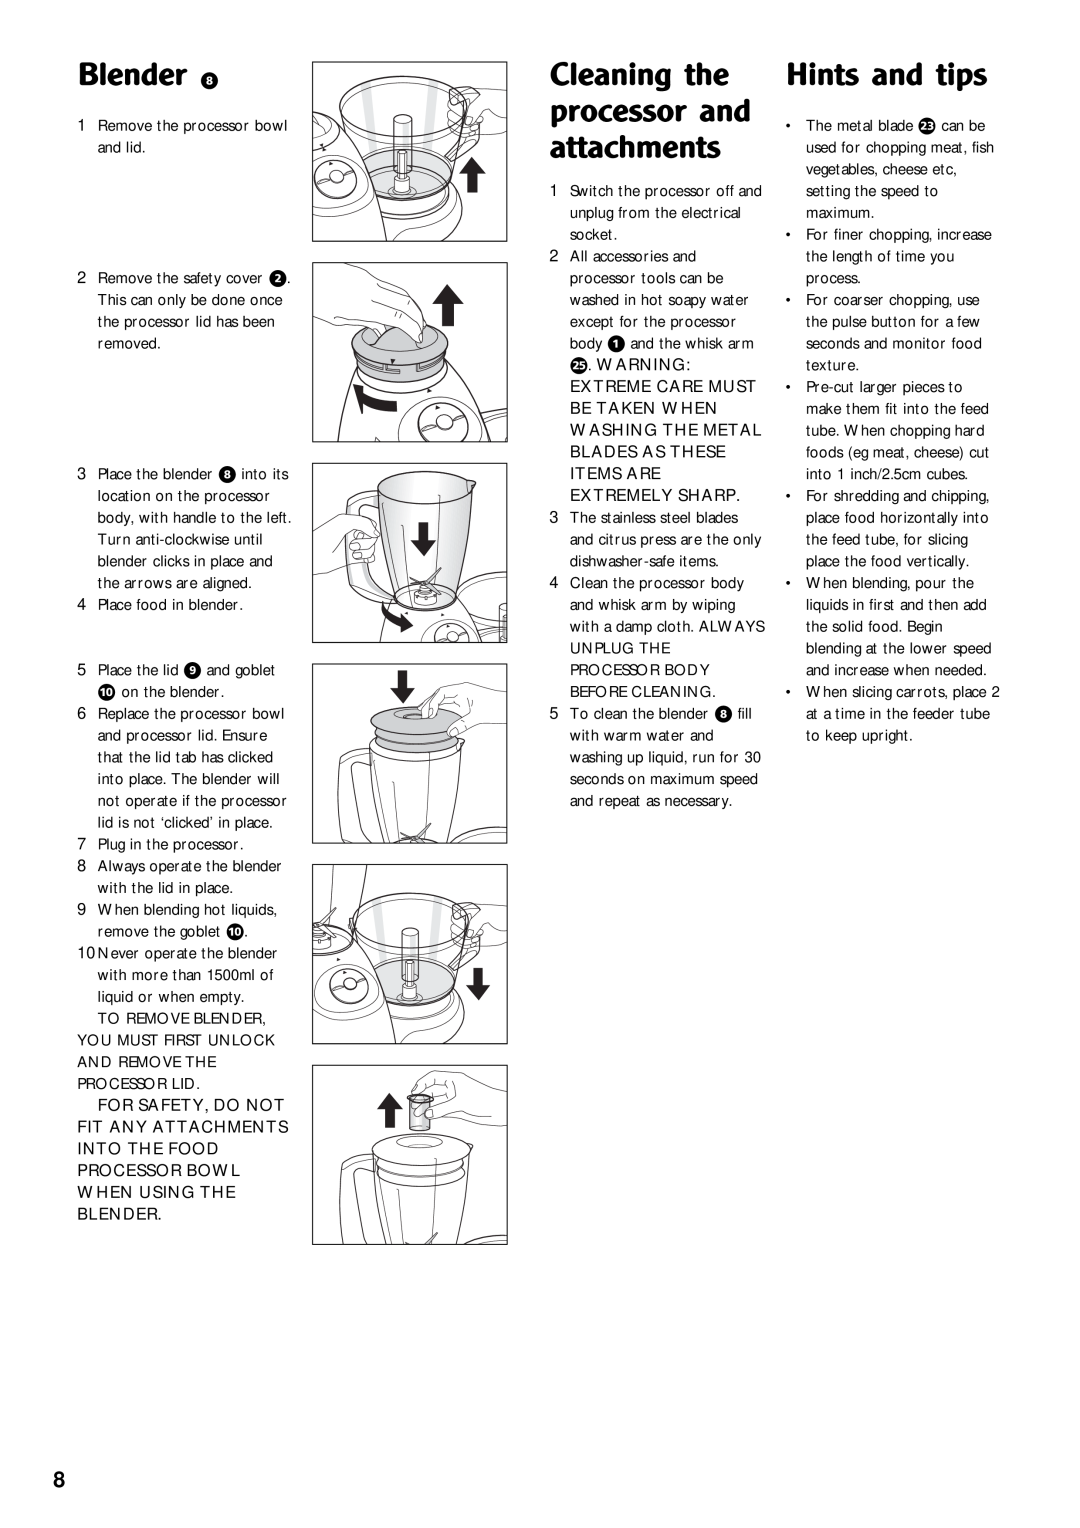 Morphy Richards 760 manual Blender ·, Hints and tips, Cleaning the processor and attachments 